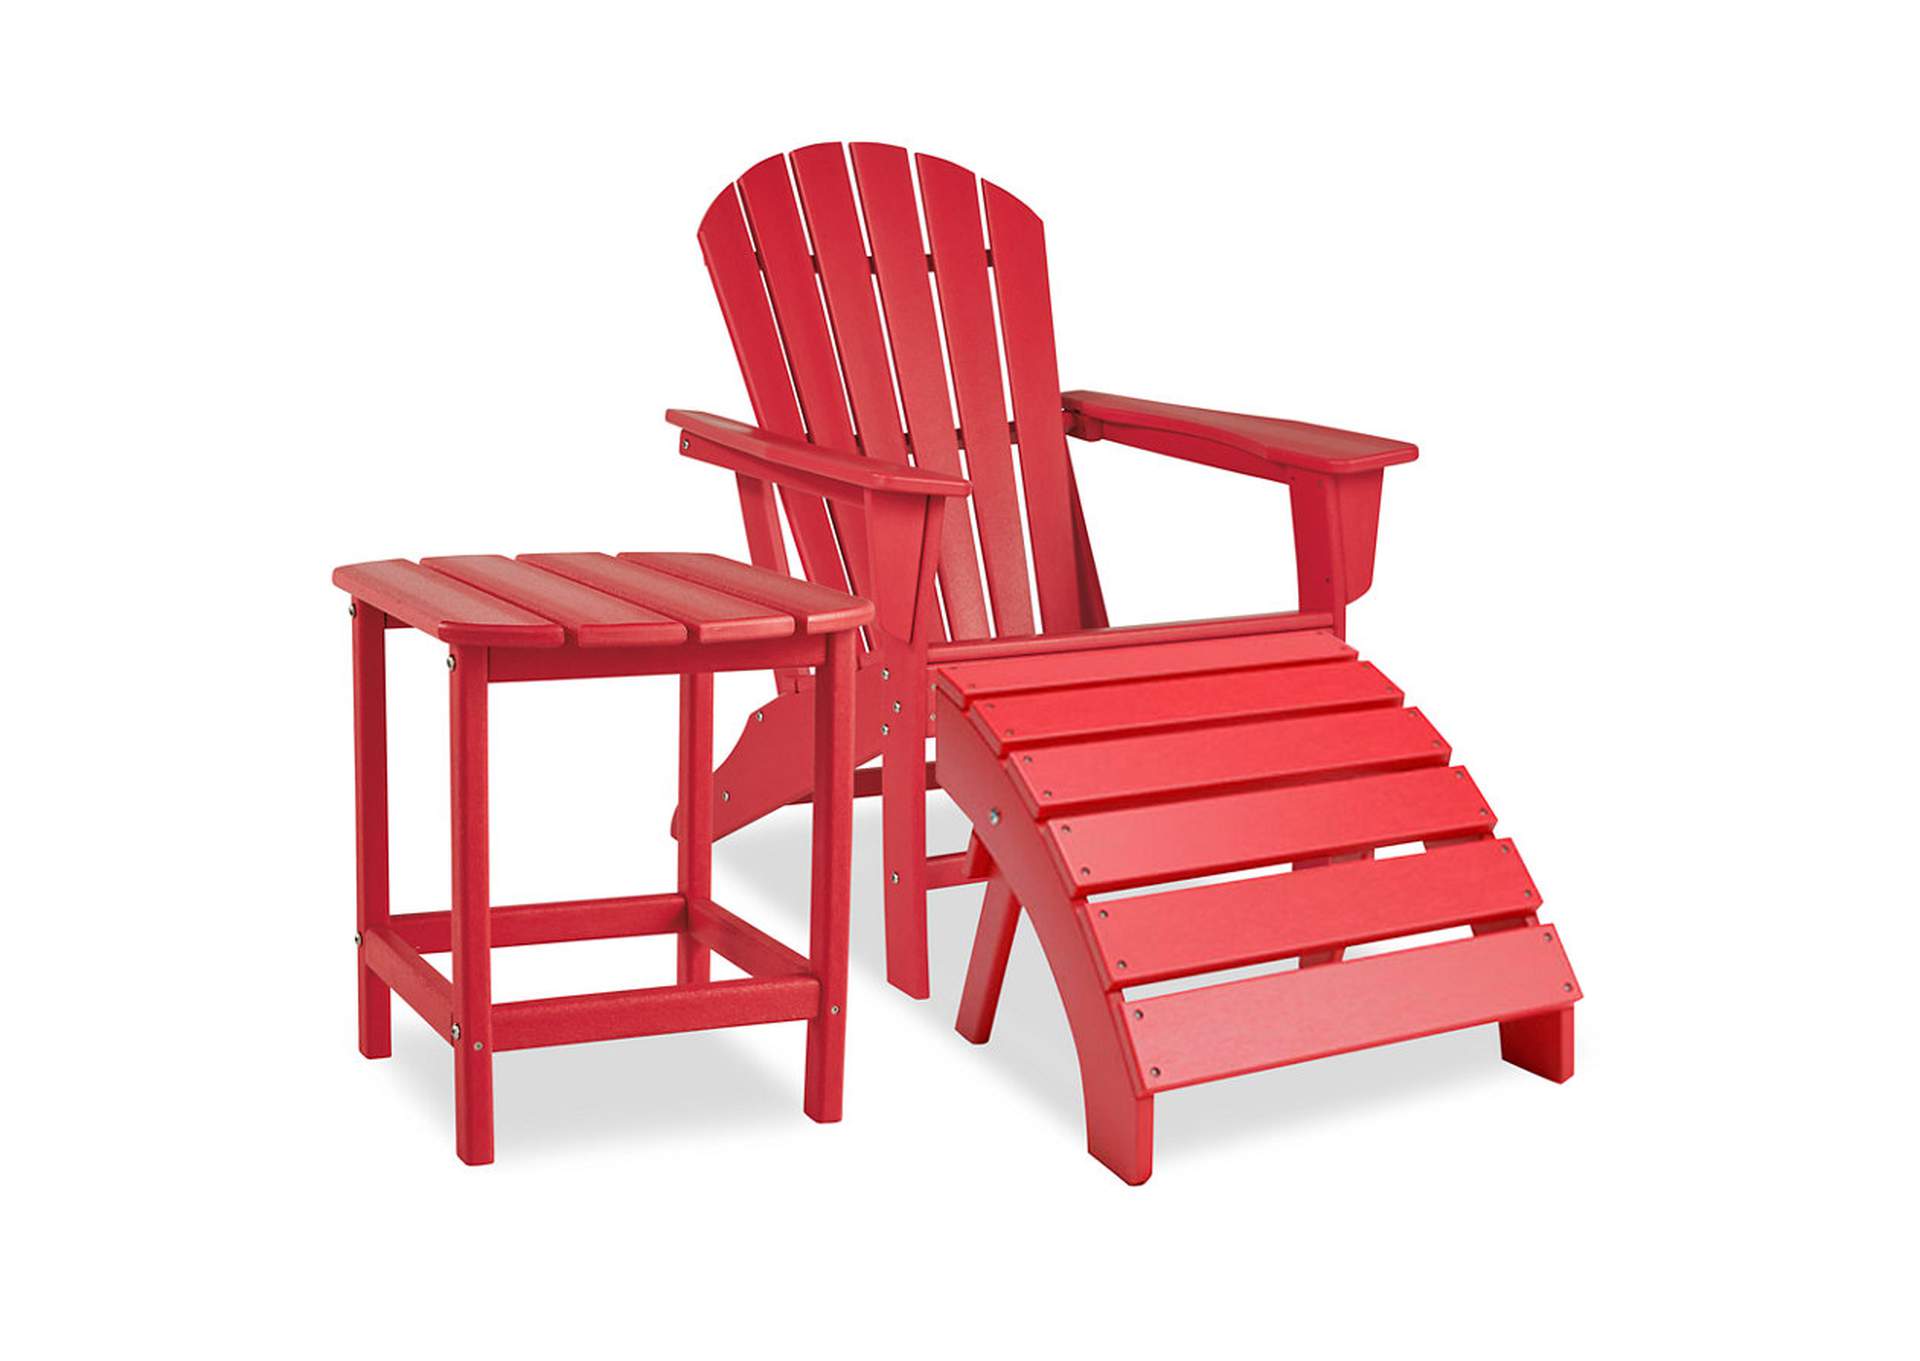 Sundown Treasure Outdoor Adirondack Chair and Ottoman with Side Table,Outdoor By Ashley